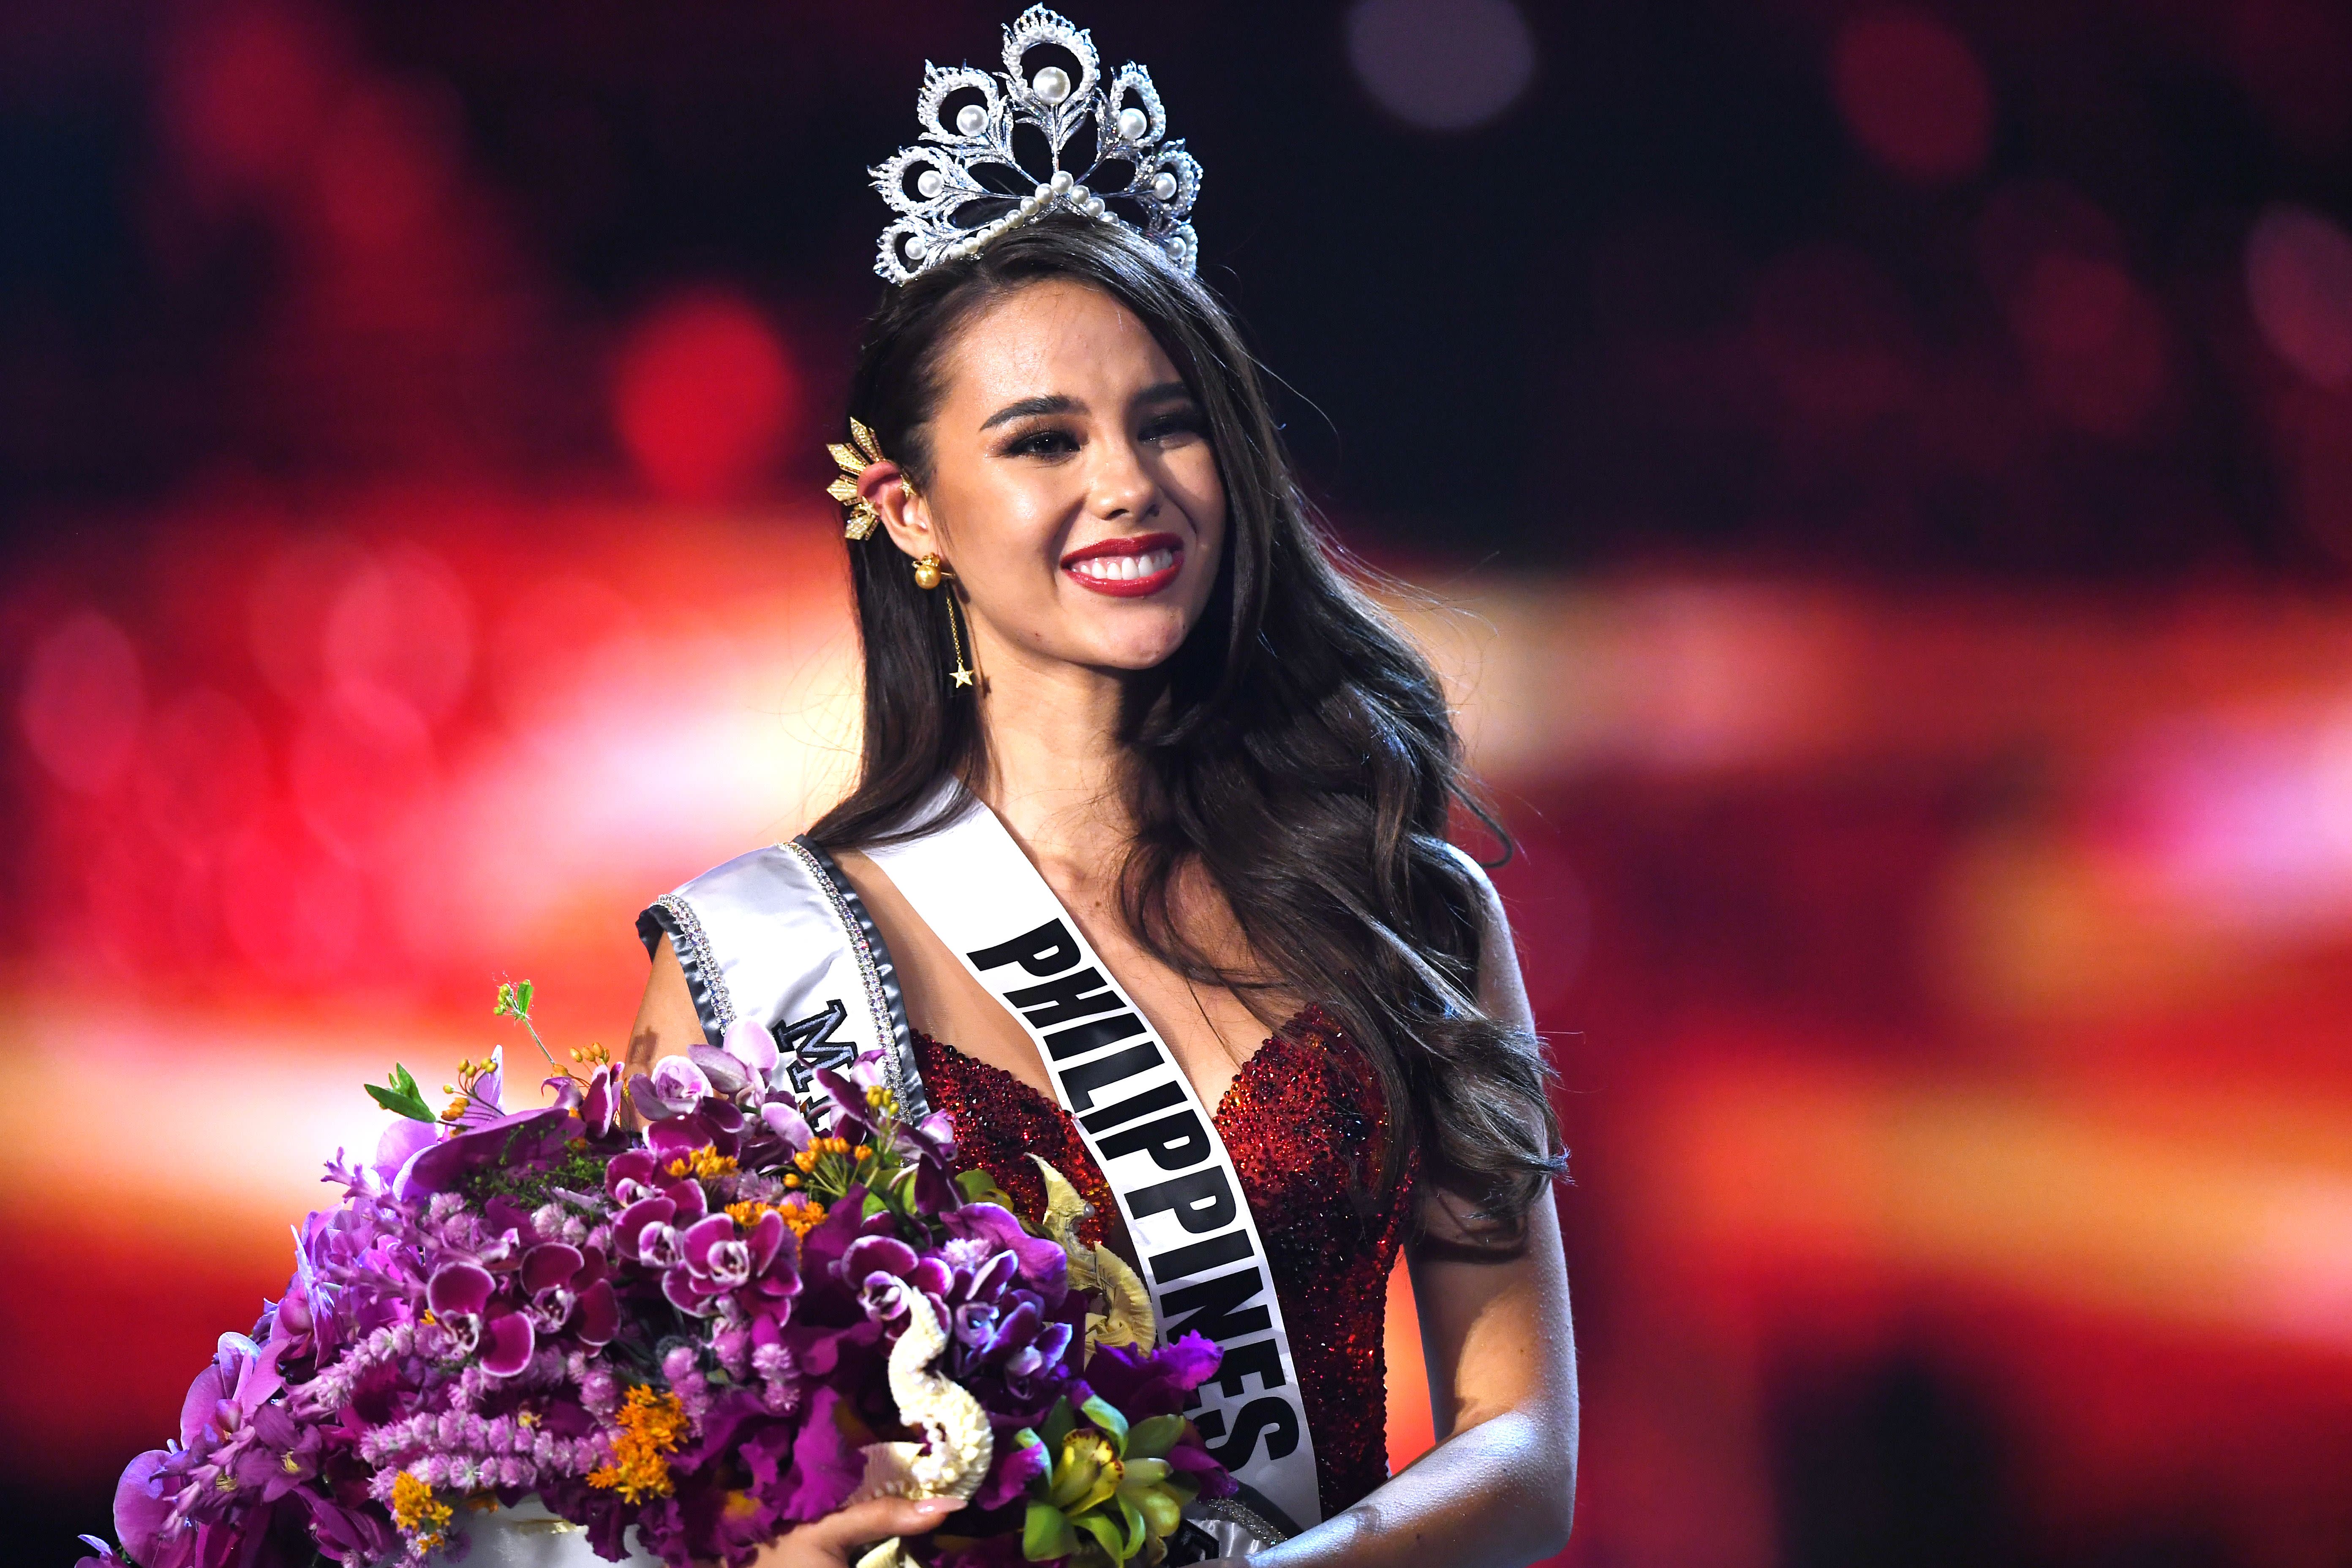 Miss Universe's mom had dream daughter would win in red